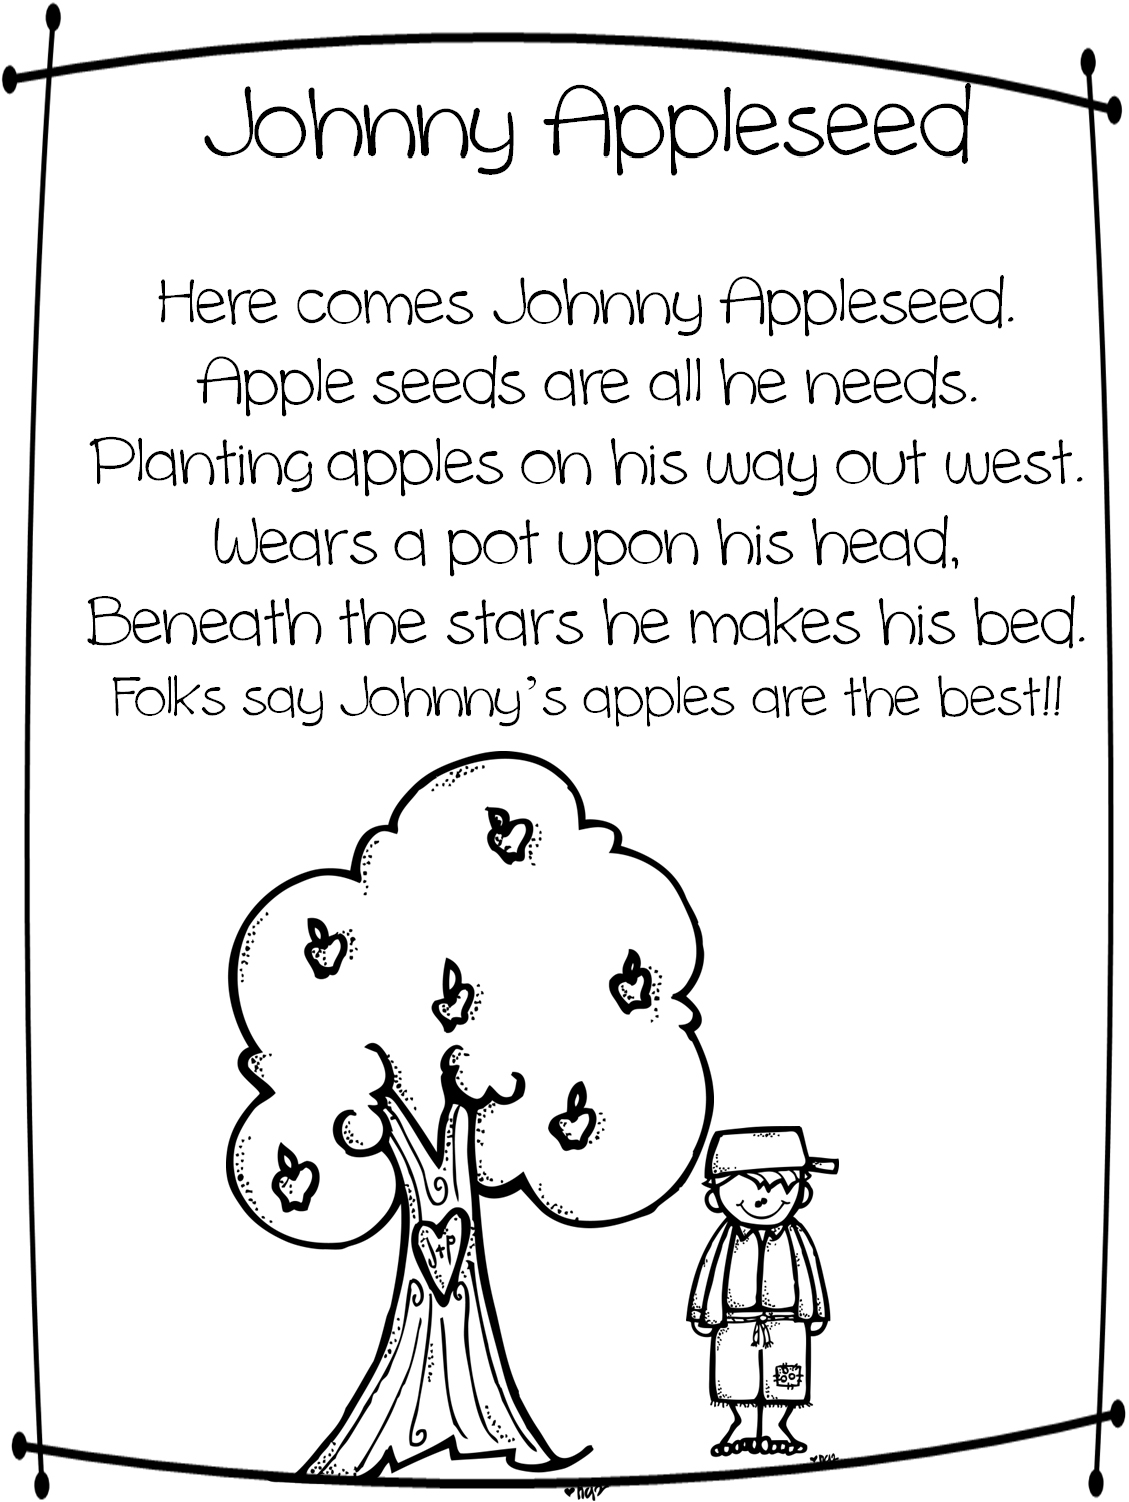 johnny-appleseed-story-printable-printable-word-searches